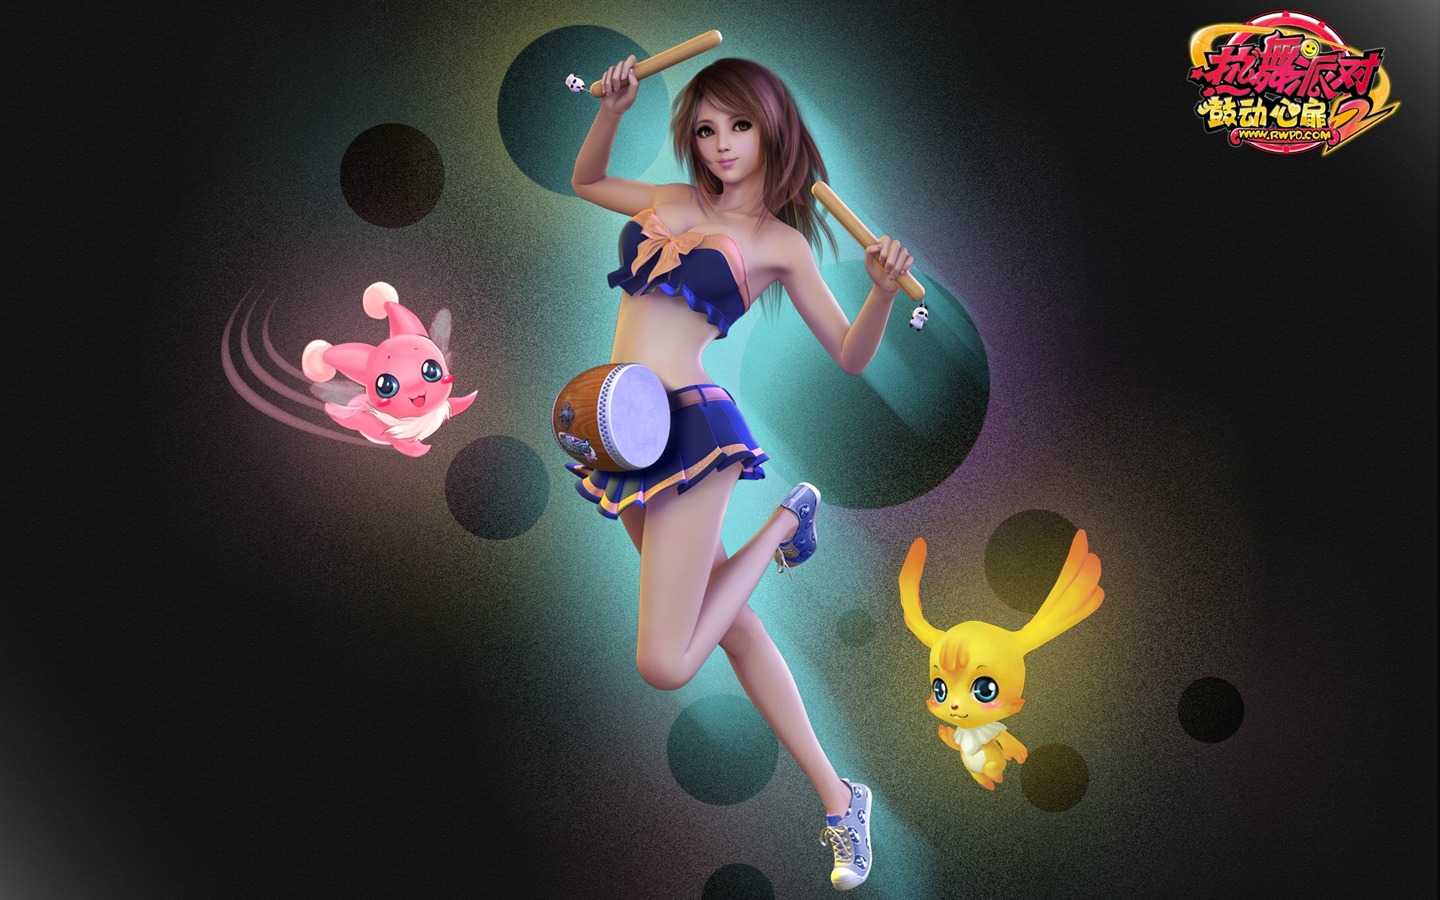 Online game Hot Dance Party II official wallpapers #16 - 1440x900